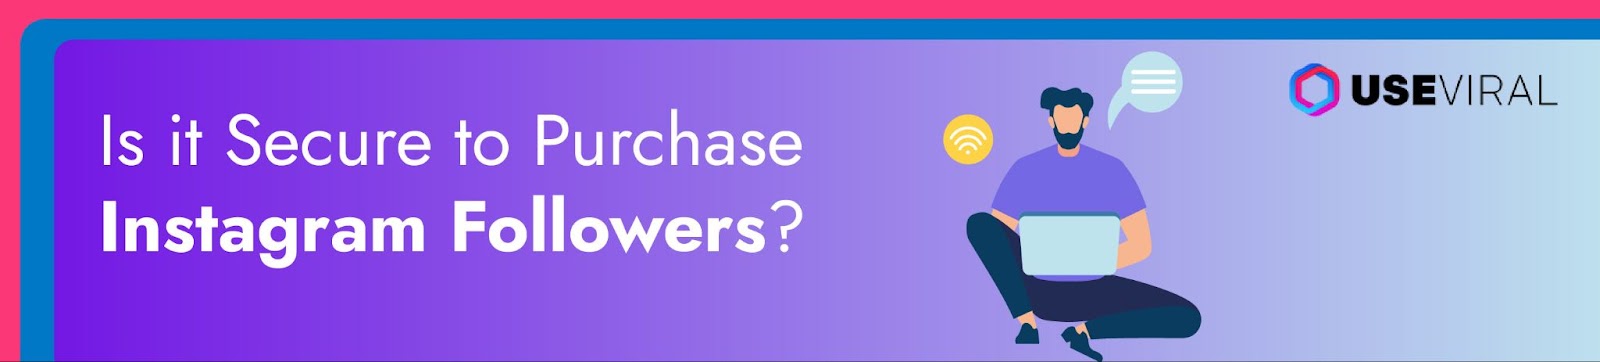 Is it Secure to Purchase Instagram Followers?